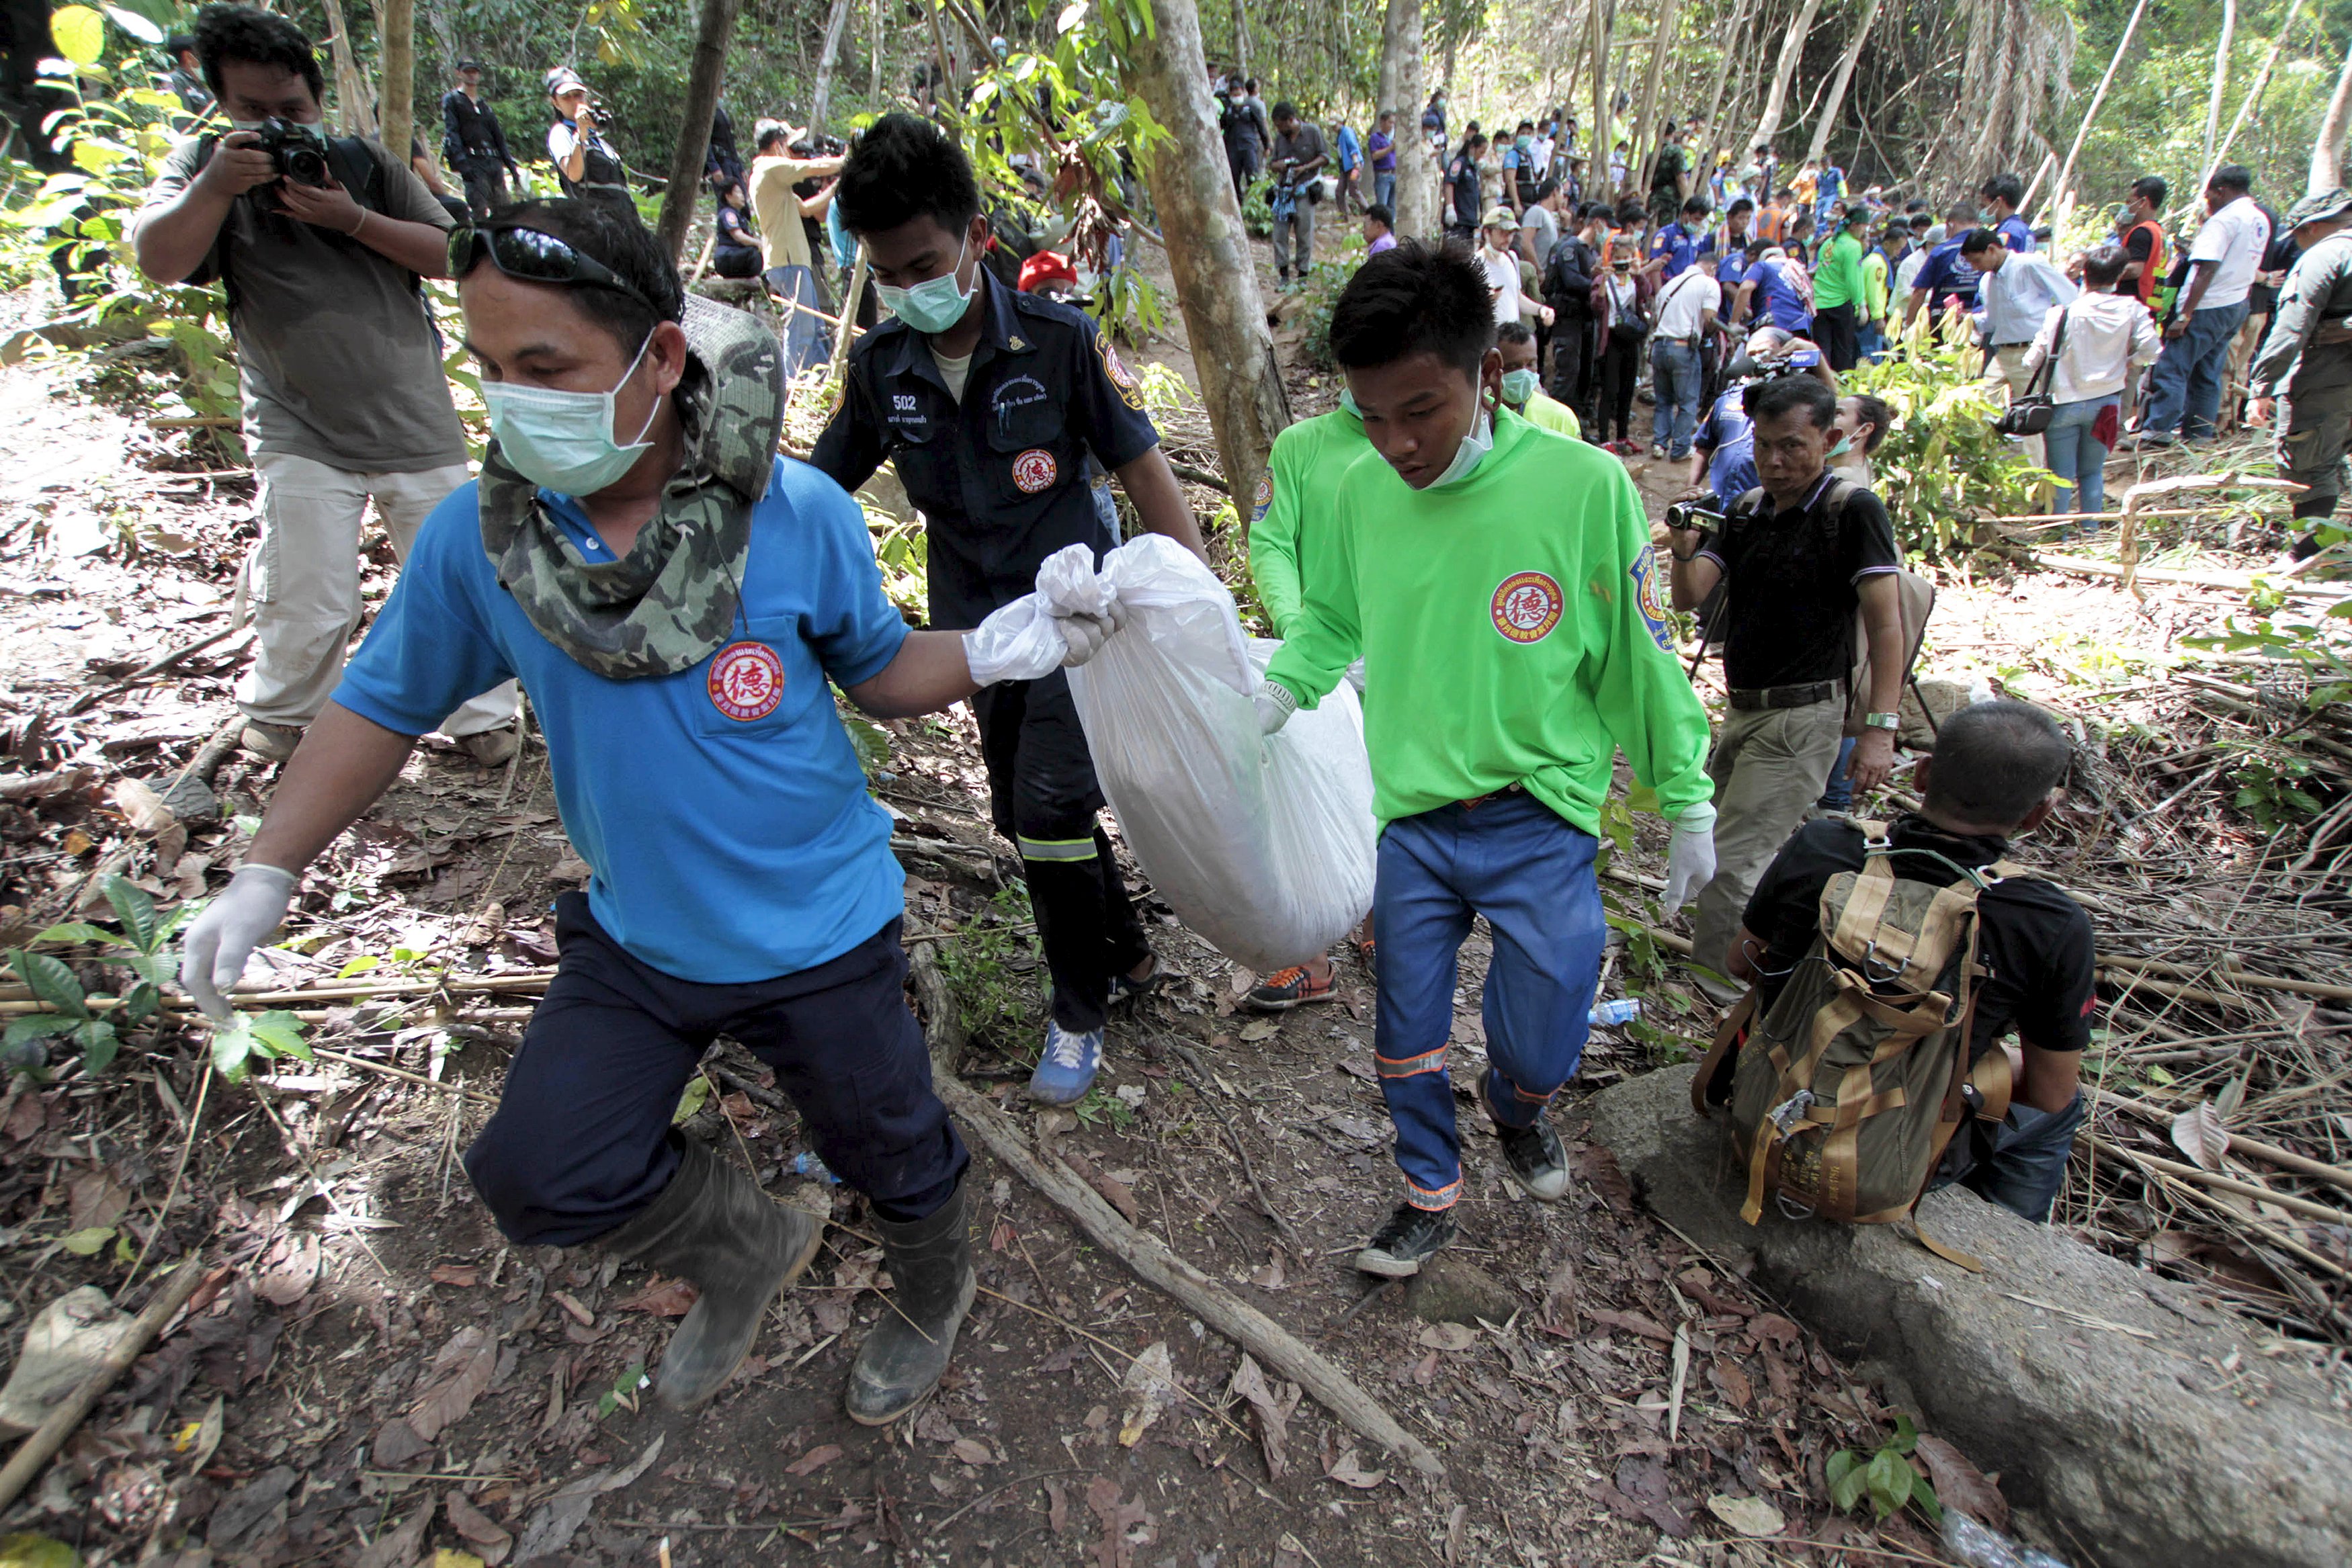 Rescue workers carry a body bag with remains retrieved from a mass grave at an abandoned camp in a jungle some three hundred meters from the border with Malaysia, in Thailand's southern Songkhla province.